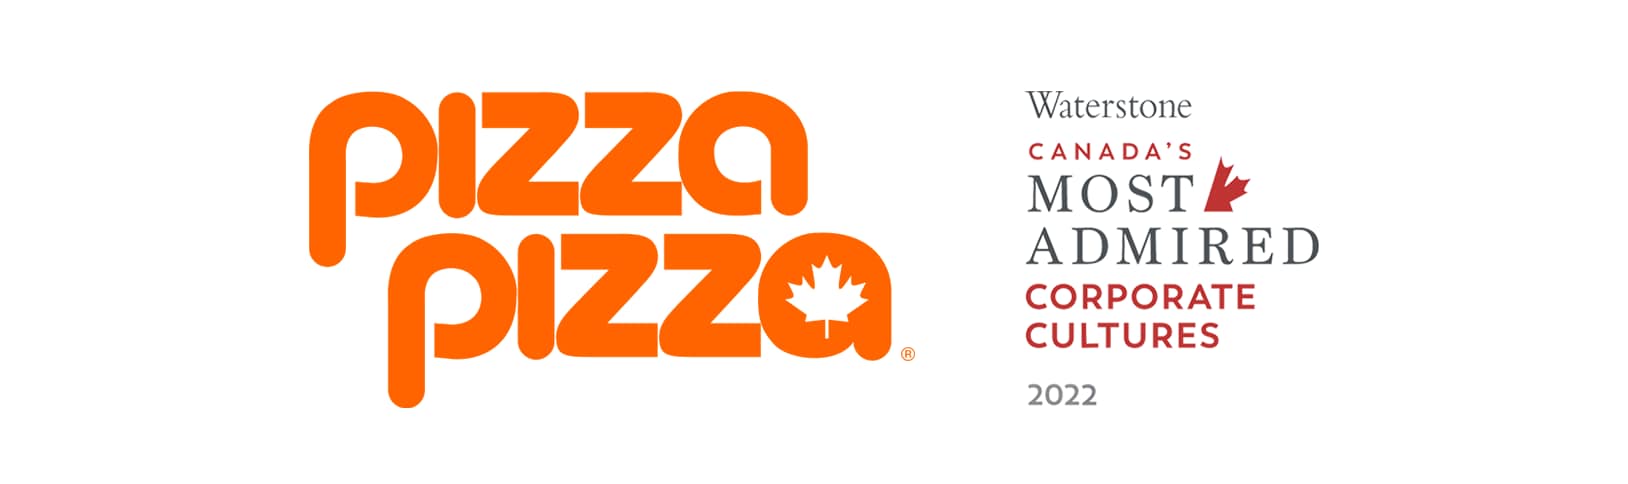 Canada's Most Admired Corporate Cultures™ Award - Pizza Pizza